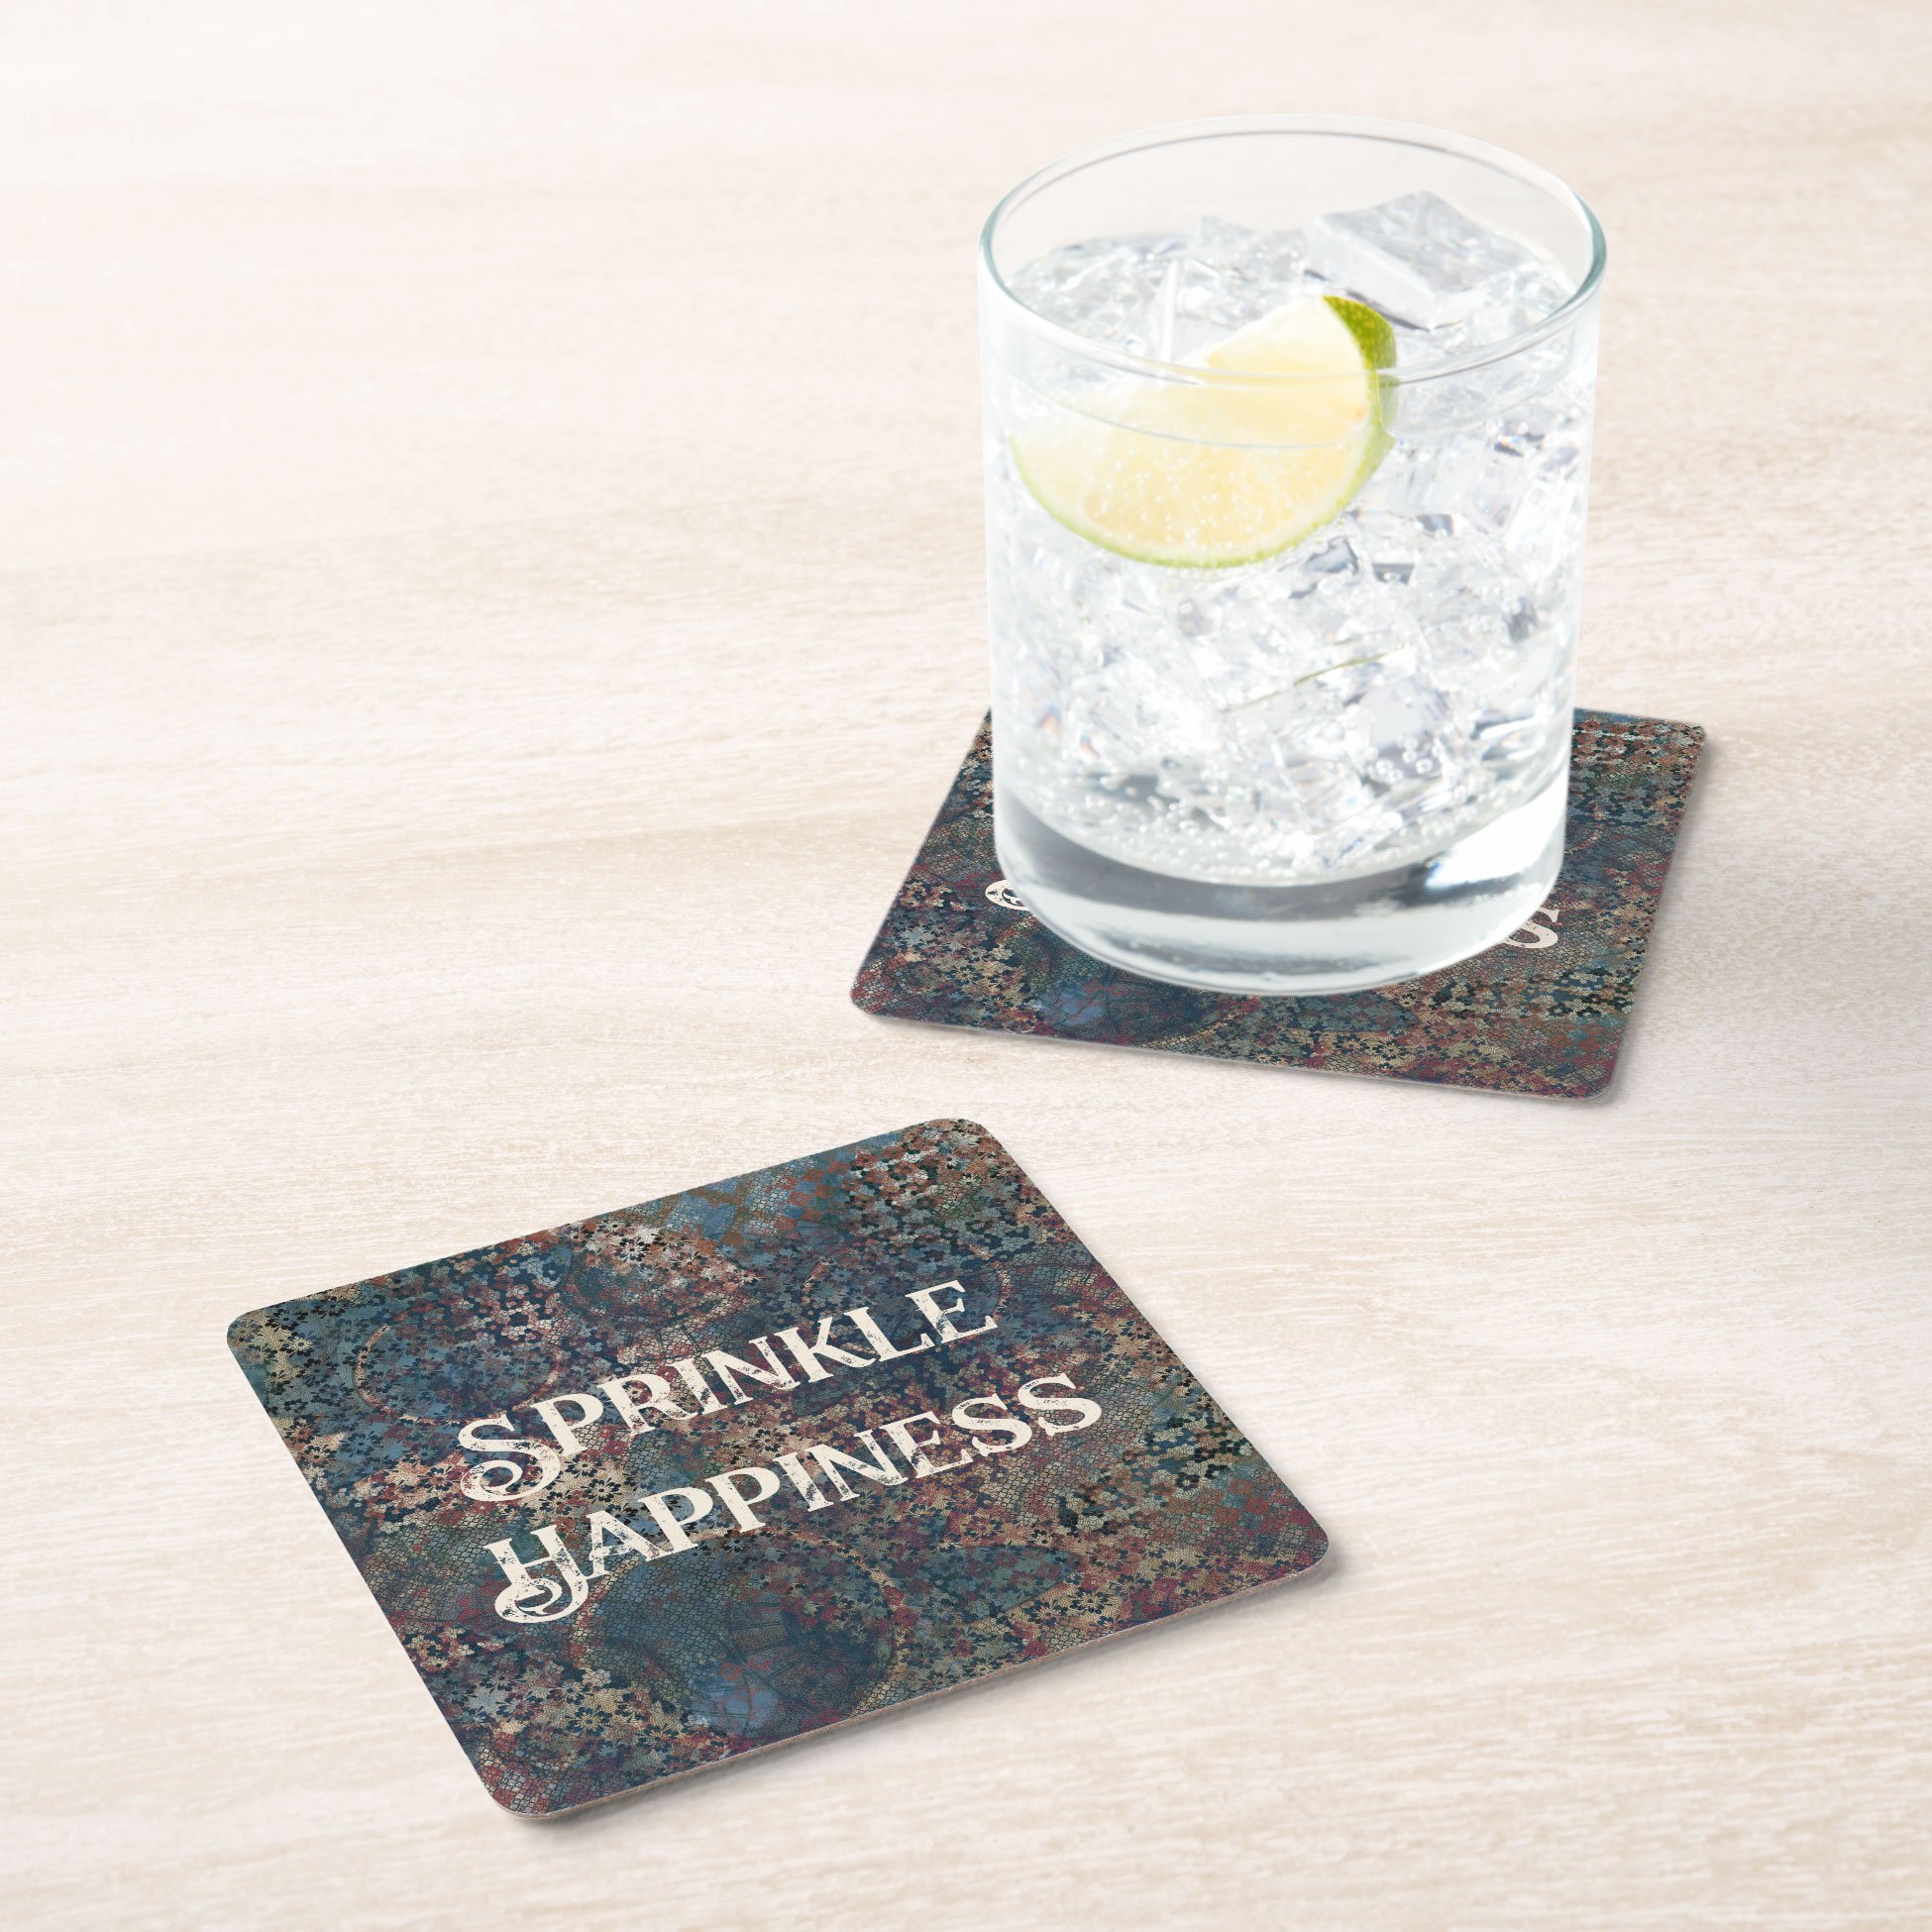 Sprinkle-Happiness-Grunge-Textured-Patchwork-Square-Paper-Coaster.jpg